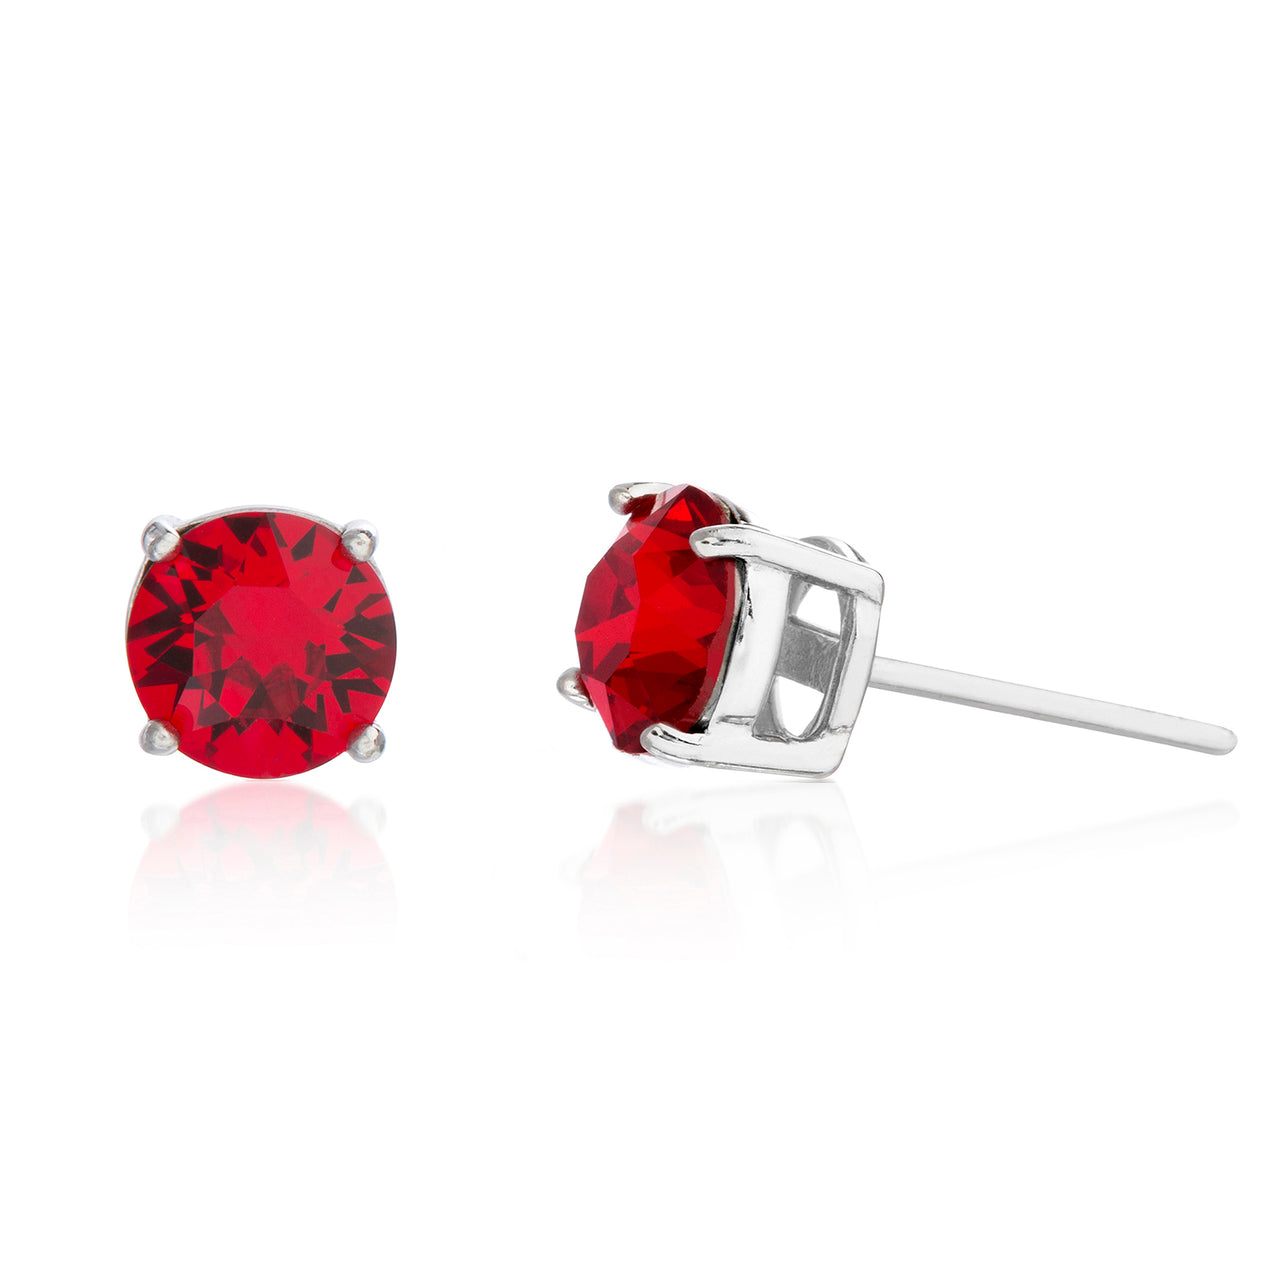 Lesa  Michele  Red  Crystal  Stud  Earring  in  Rhodium  Plated  Sterling  Silver